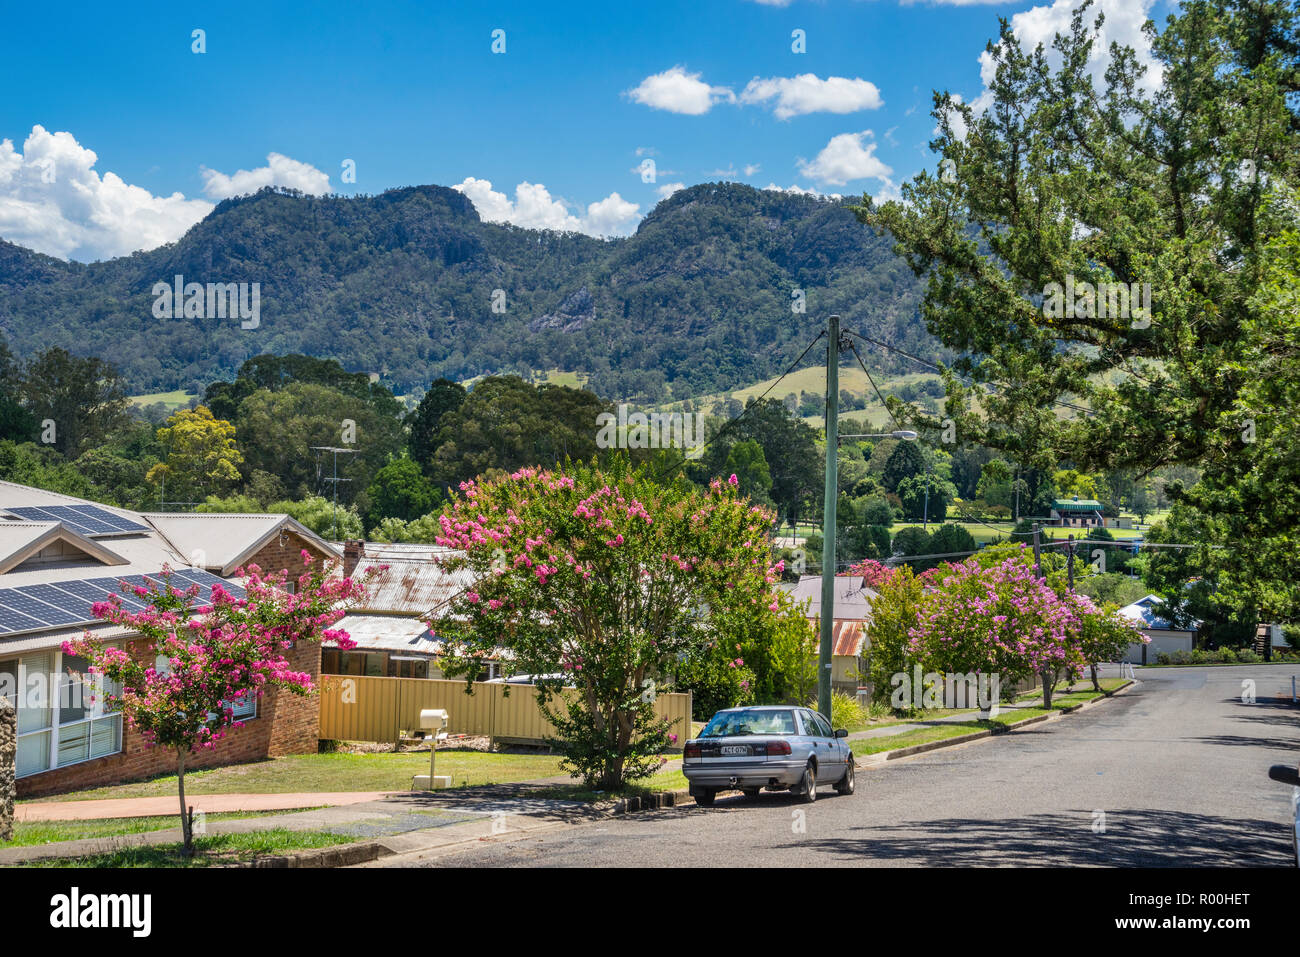 flowering trees in Tyrell Street, Gloucester with view of the Bucketts Mountains, Manning district of the Mid North Coast of New South Wales, Australi Stock Photo